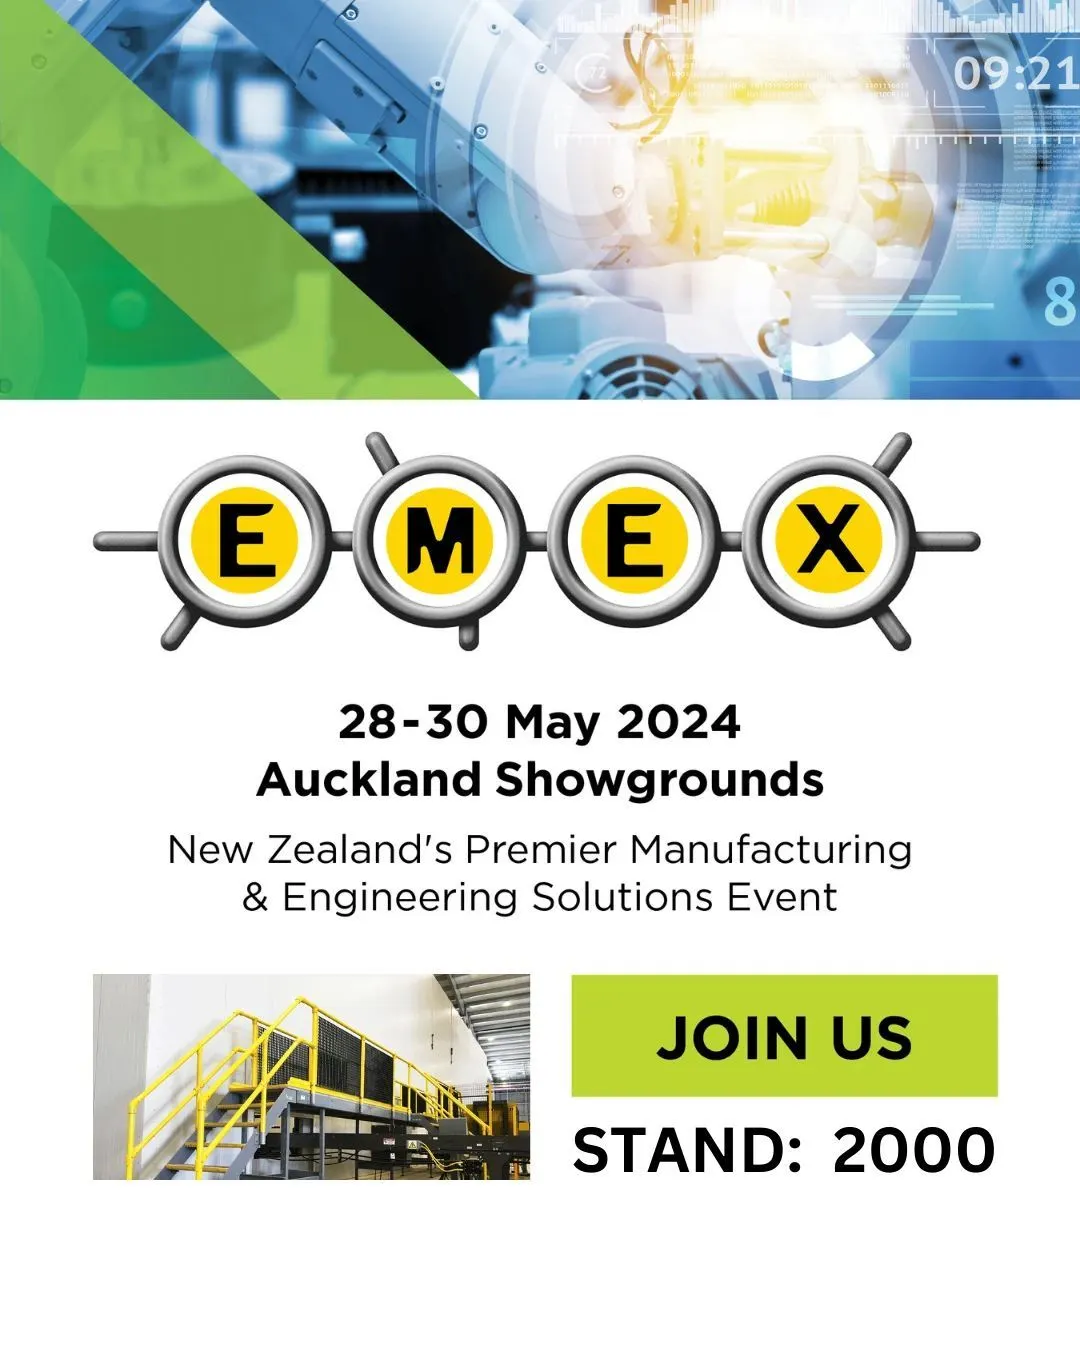 Will we see you at EMEX next week?

#emex #emex2024 #frp #frpproducts #engineers #engineering #industrial #manufacturing